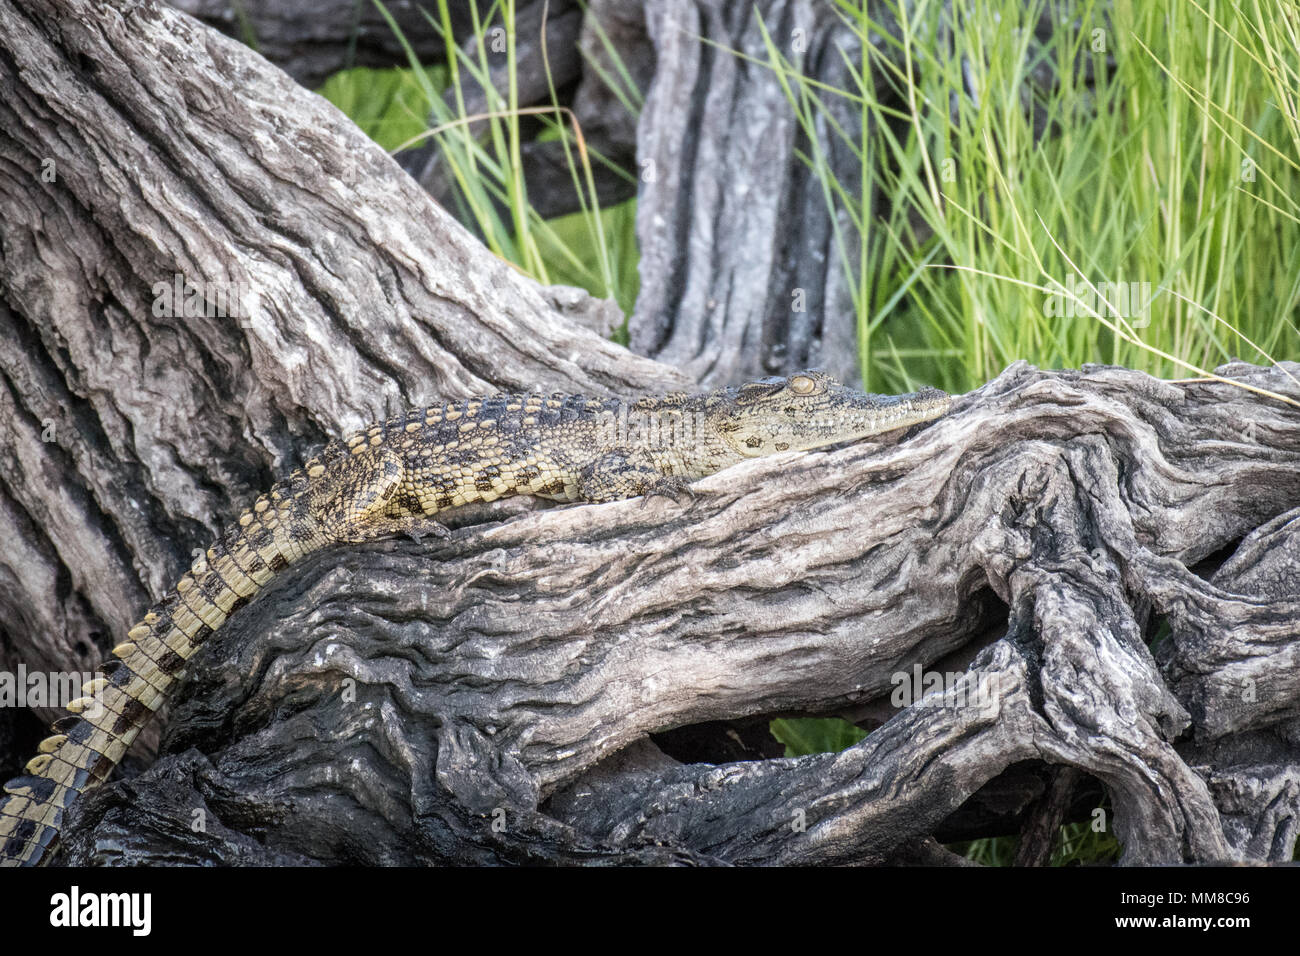 A Nile crocodile basks in the sun and stretches itself out along a tree limb. Chobe National Park - Botswana Stock Photo